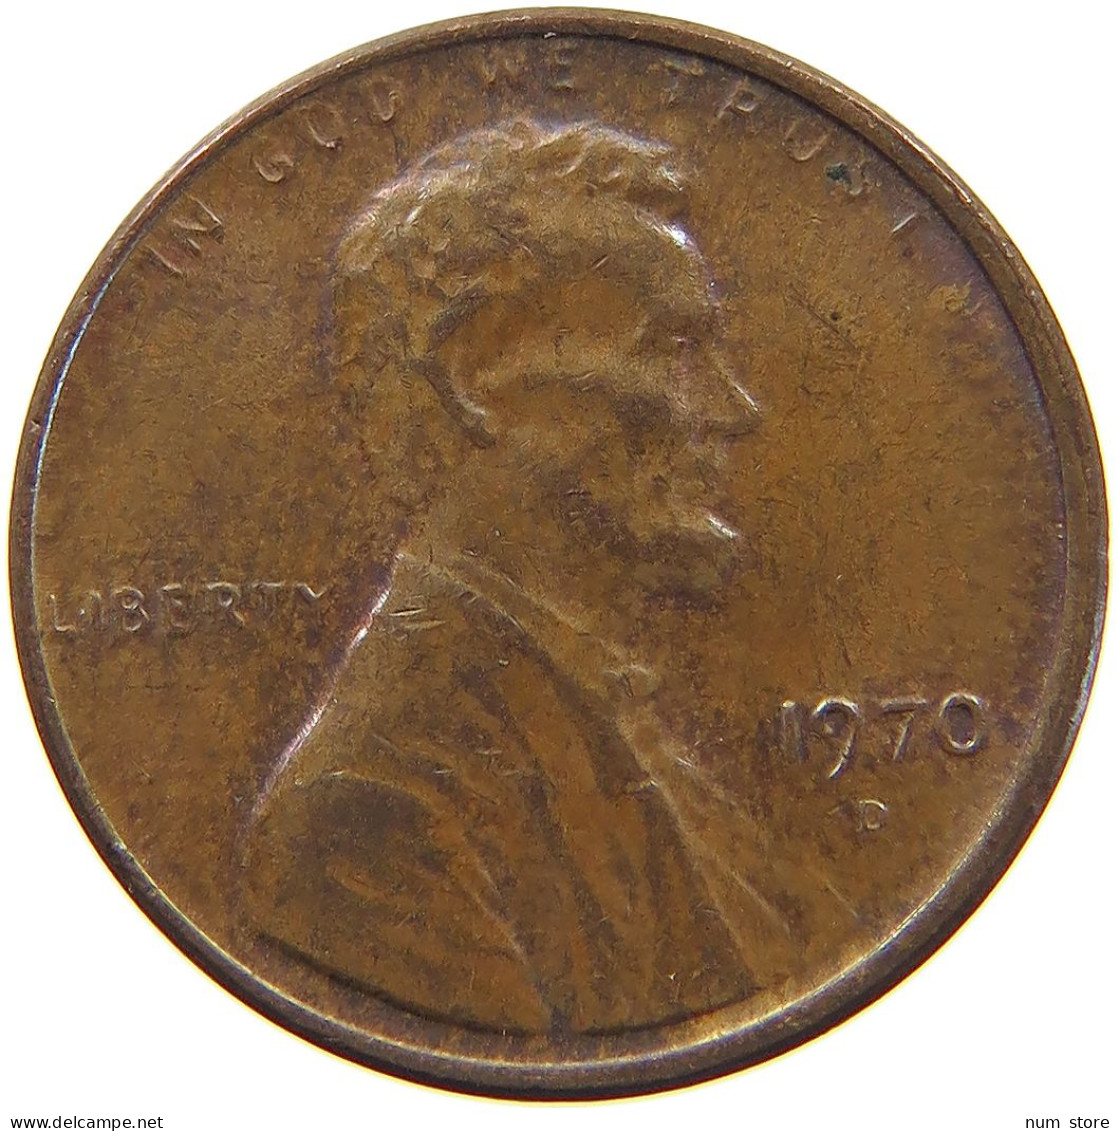 UNITED STATES OF AMERICA CENT 1970 D LINCOLN MEMORIAL #c079 0275 - 1959-…: Lincoln, Memorial Reverse